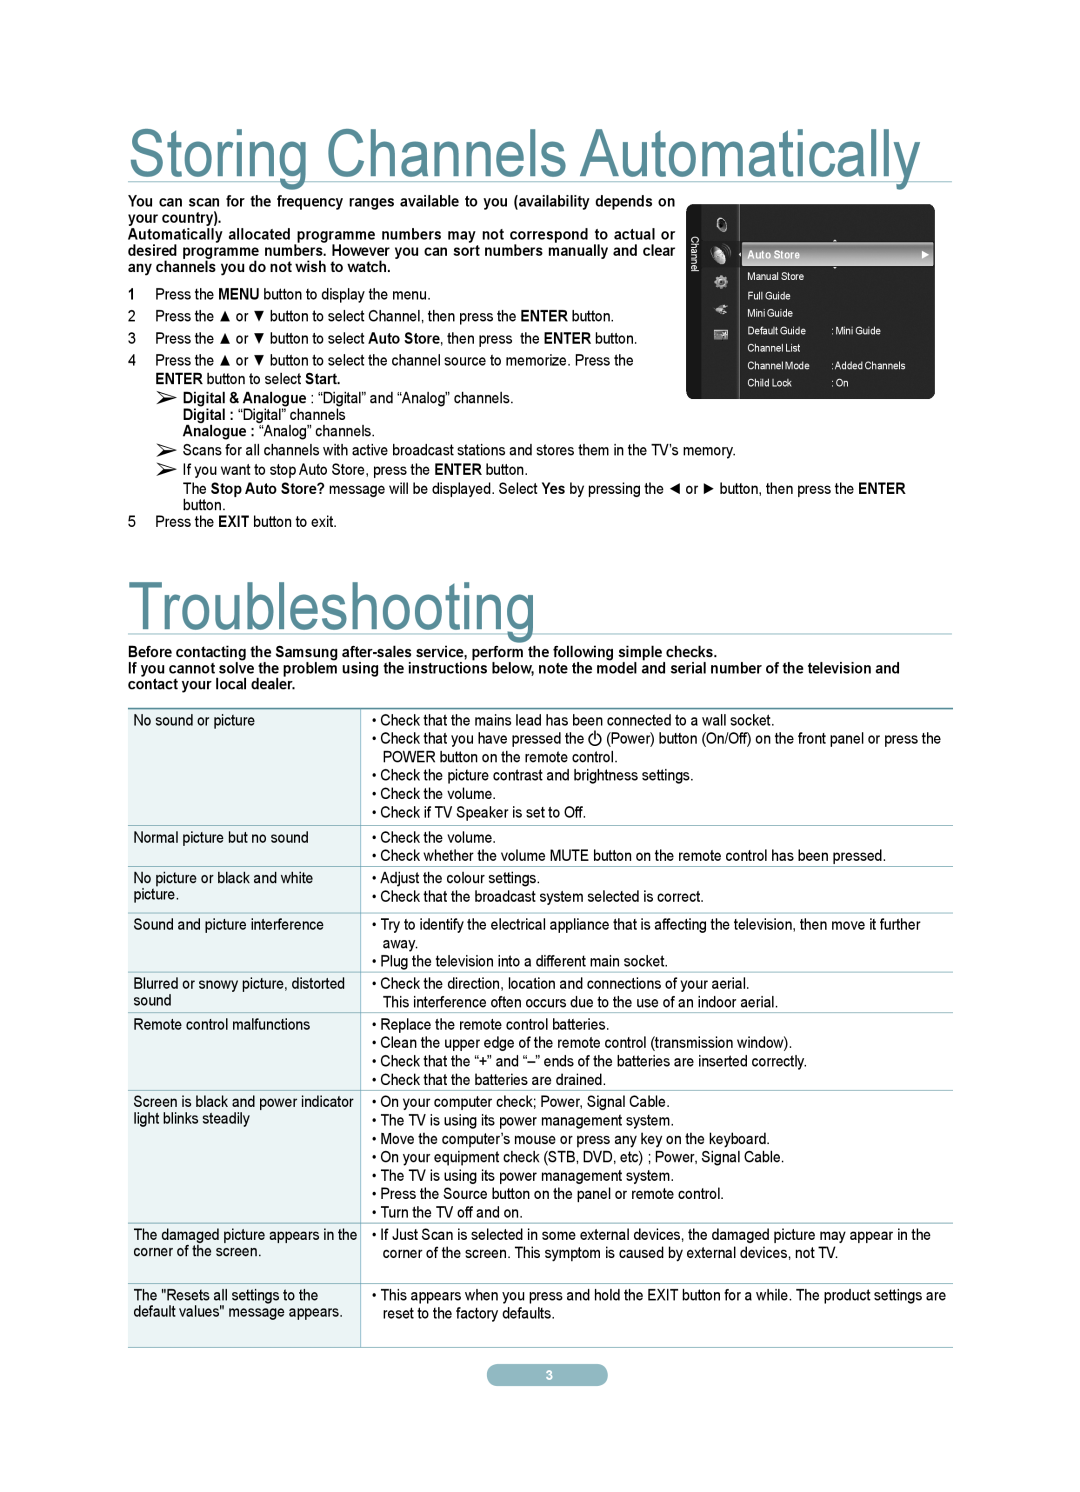 Samsung PDP TV quick start Troubleshooting, Storing Channels Automatically 